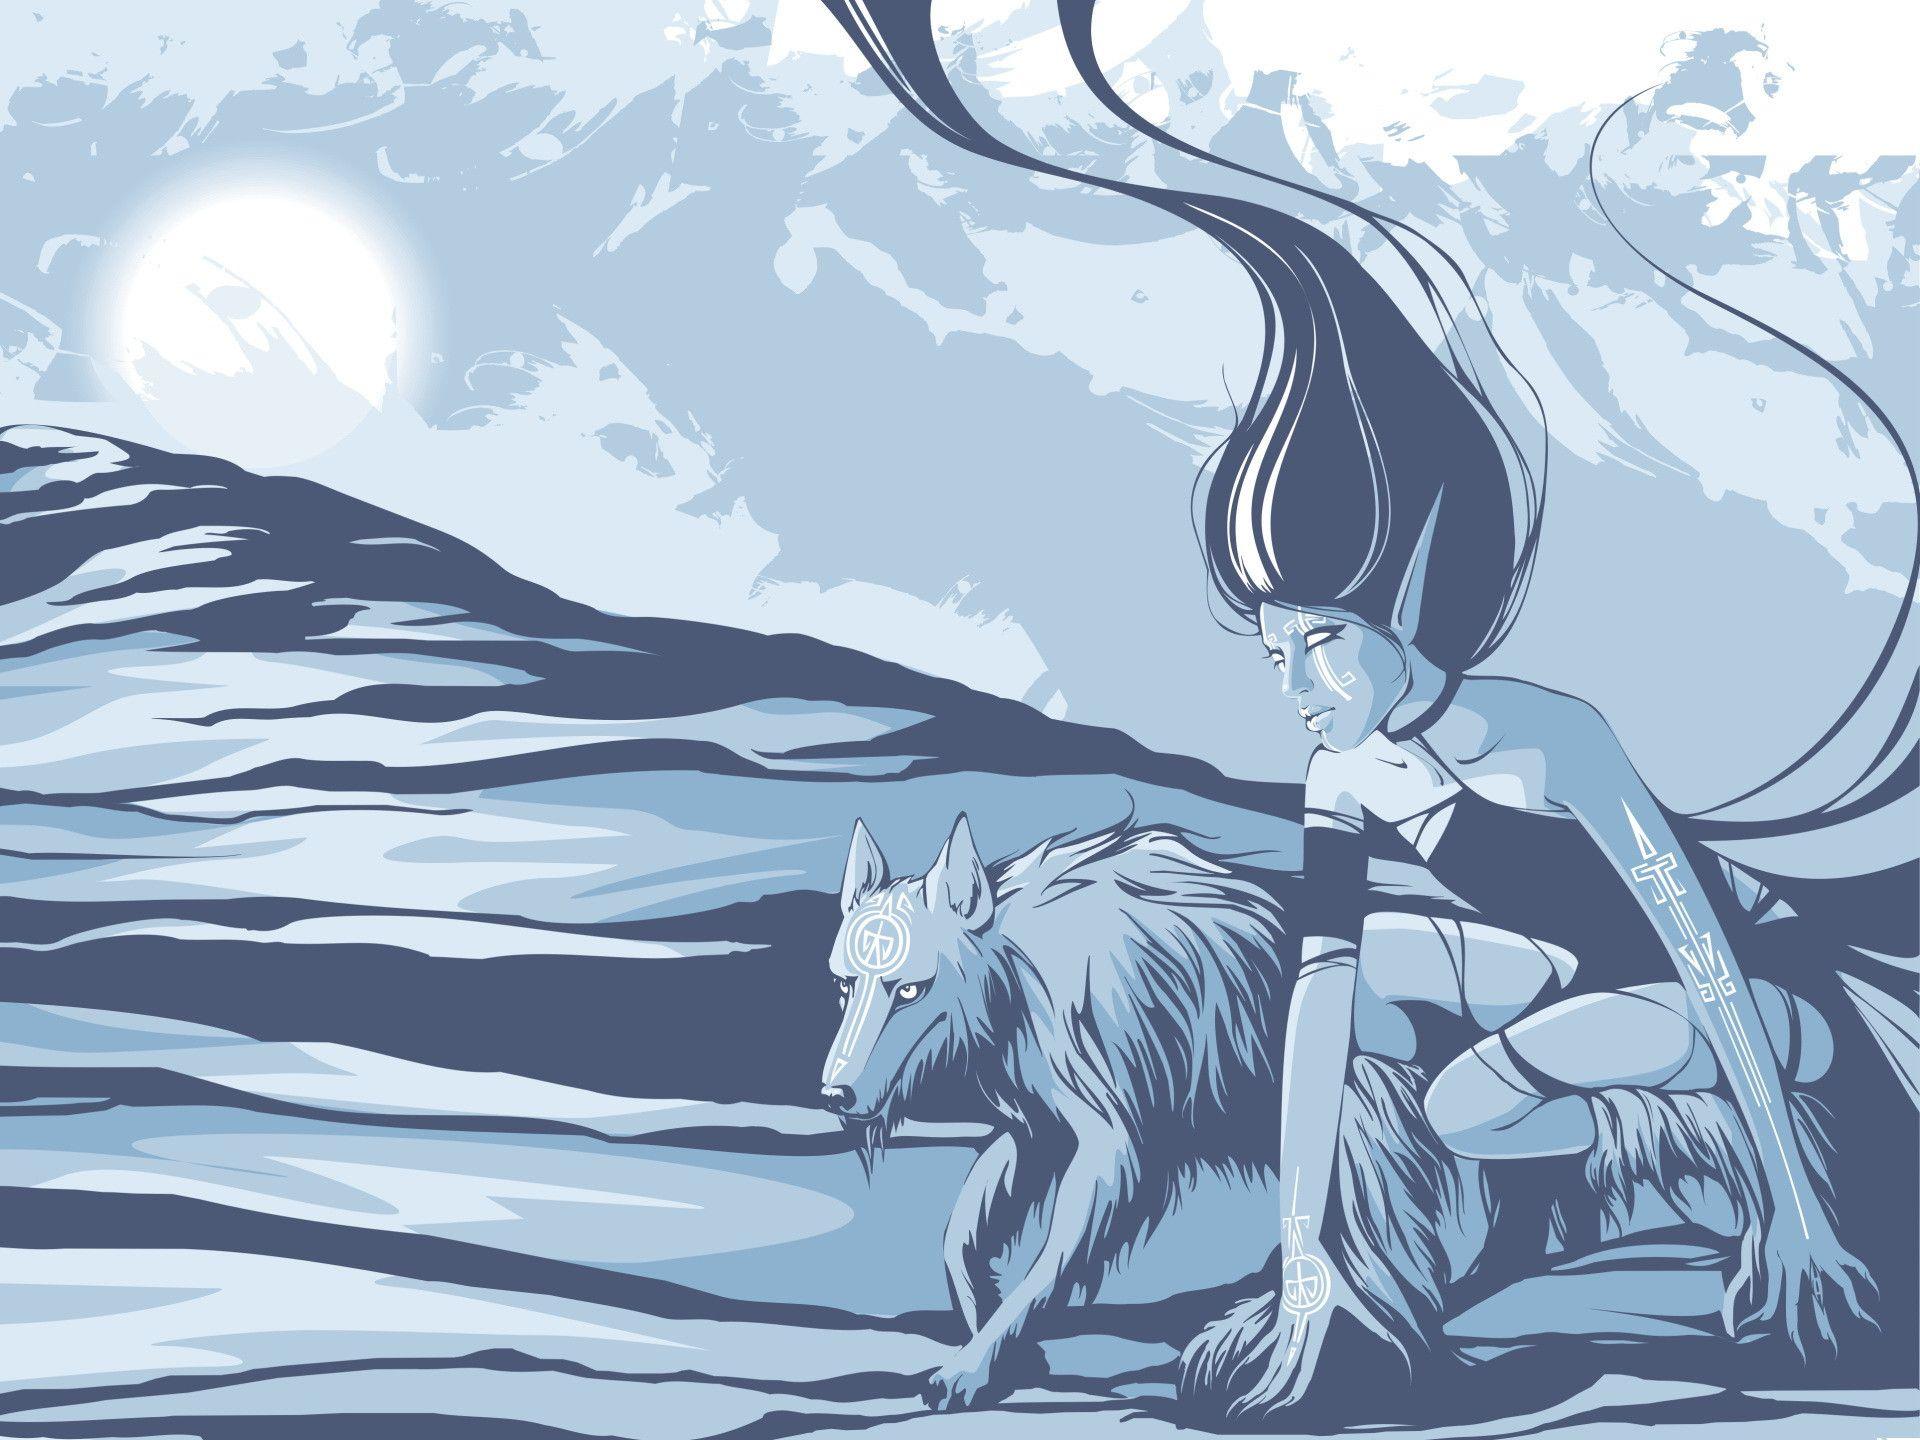 The girl and the wolf in the mountains wallpaper and image